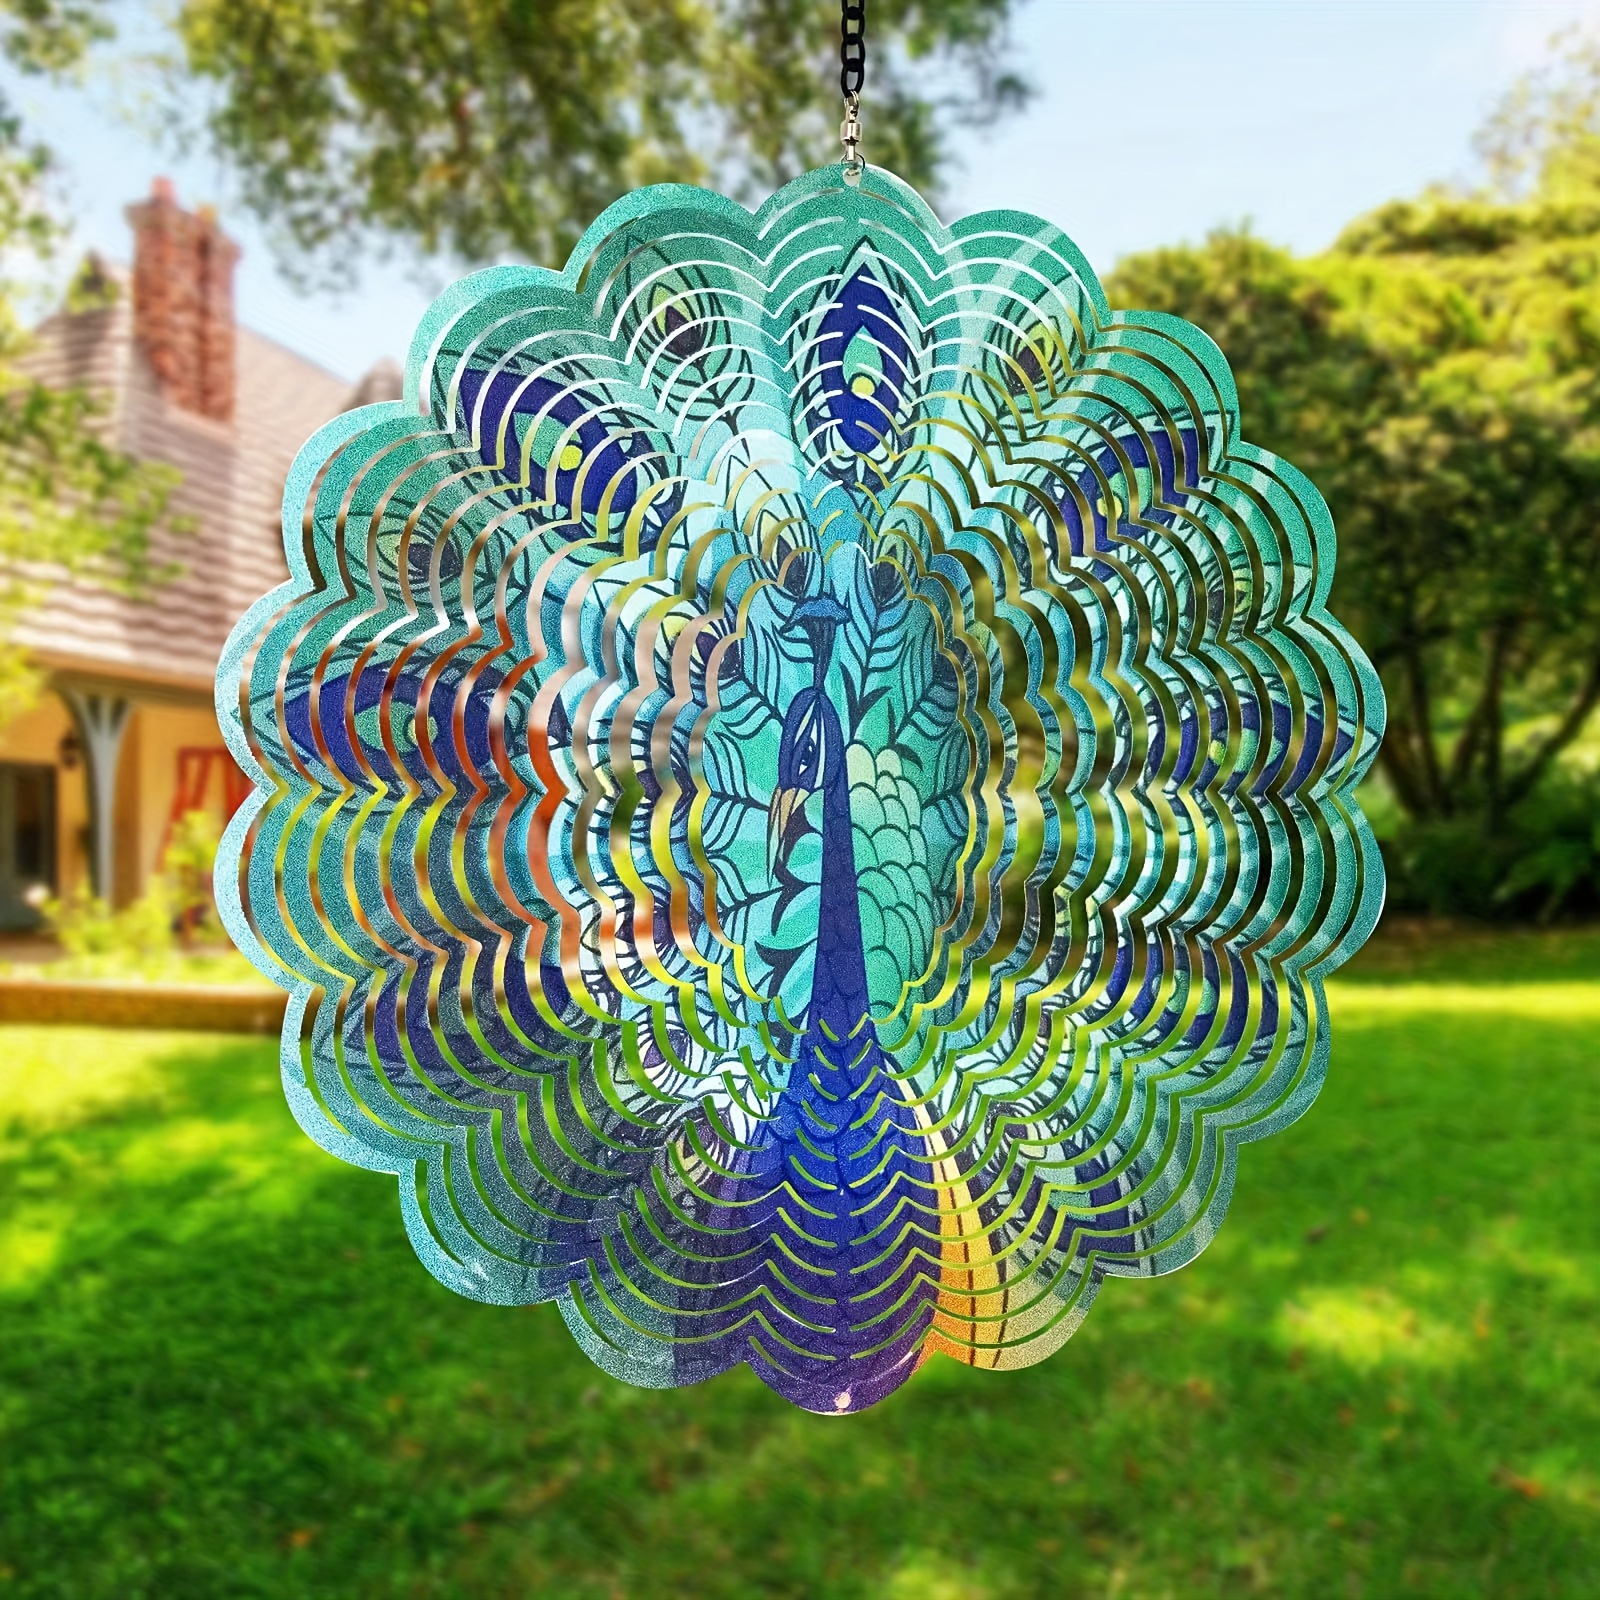 

1pc Peacock Wind Spinner, 3d Stainless Steel Hanging Ornament, Garden Decor With Epoxy Resin Coating, Colorful Outdoor Patio Yard Art, Durable With 360° Swivel Hook